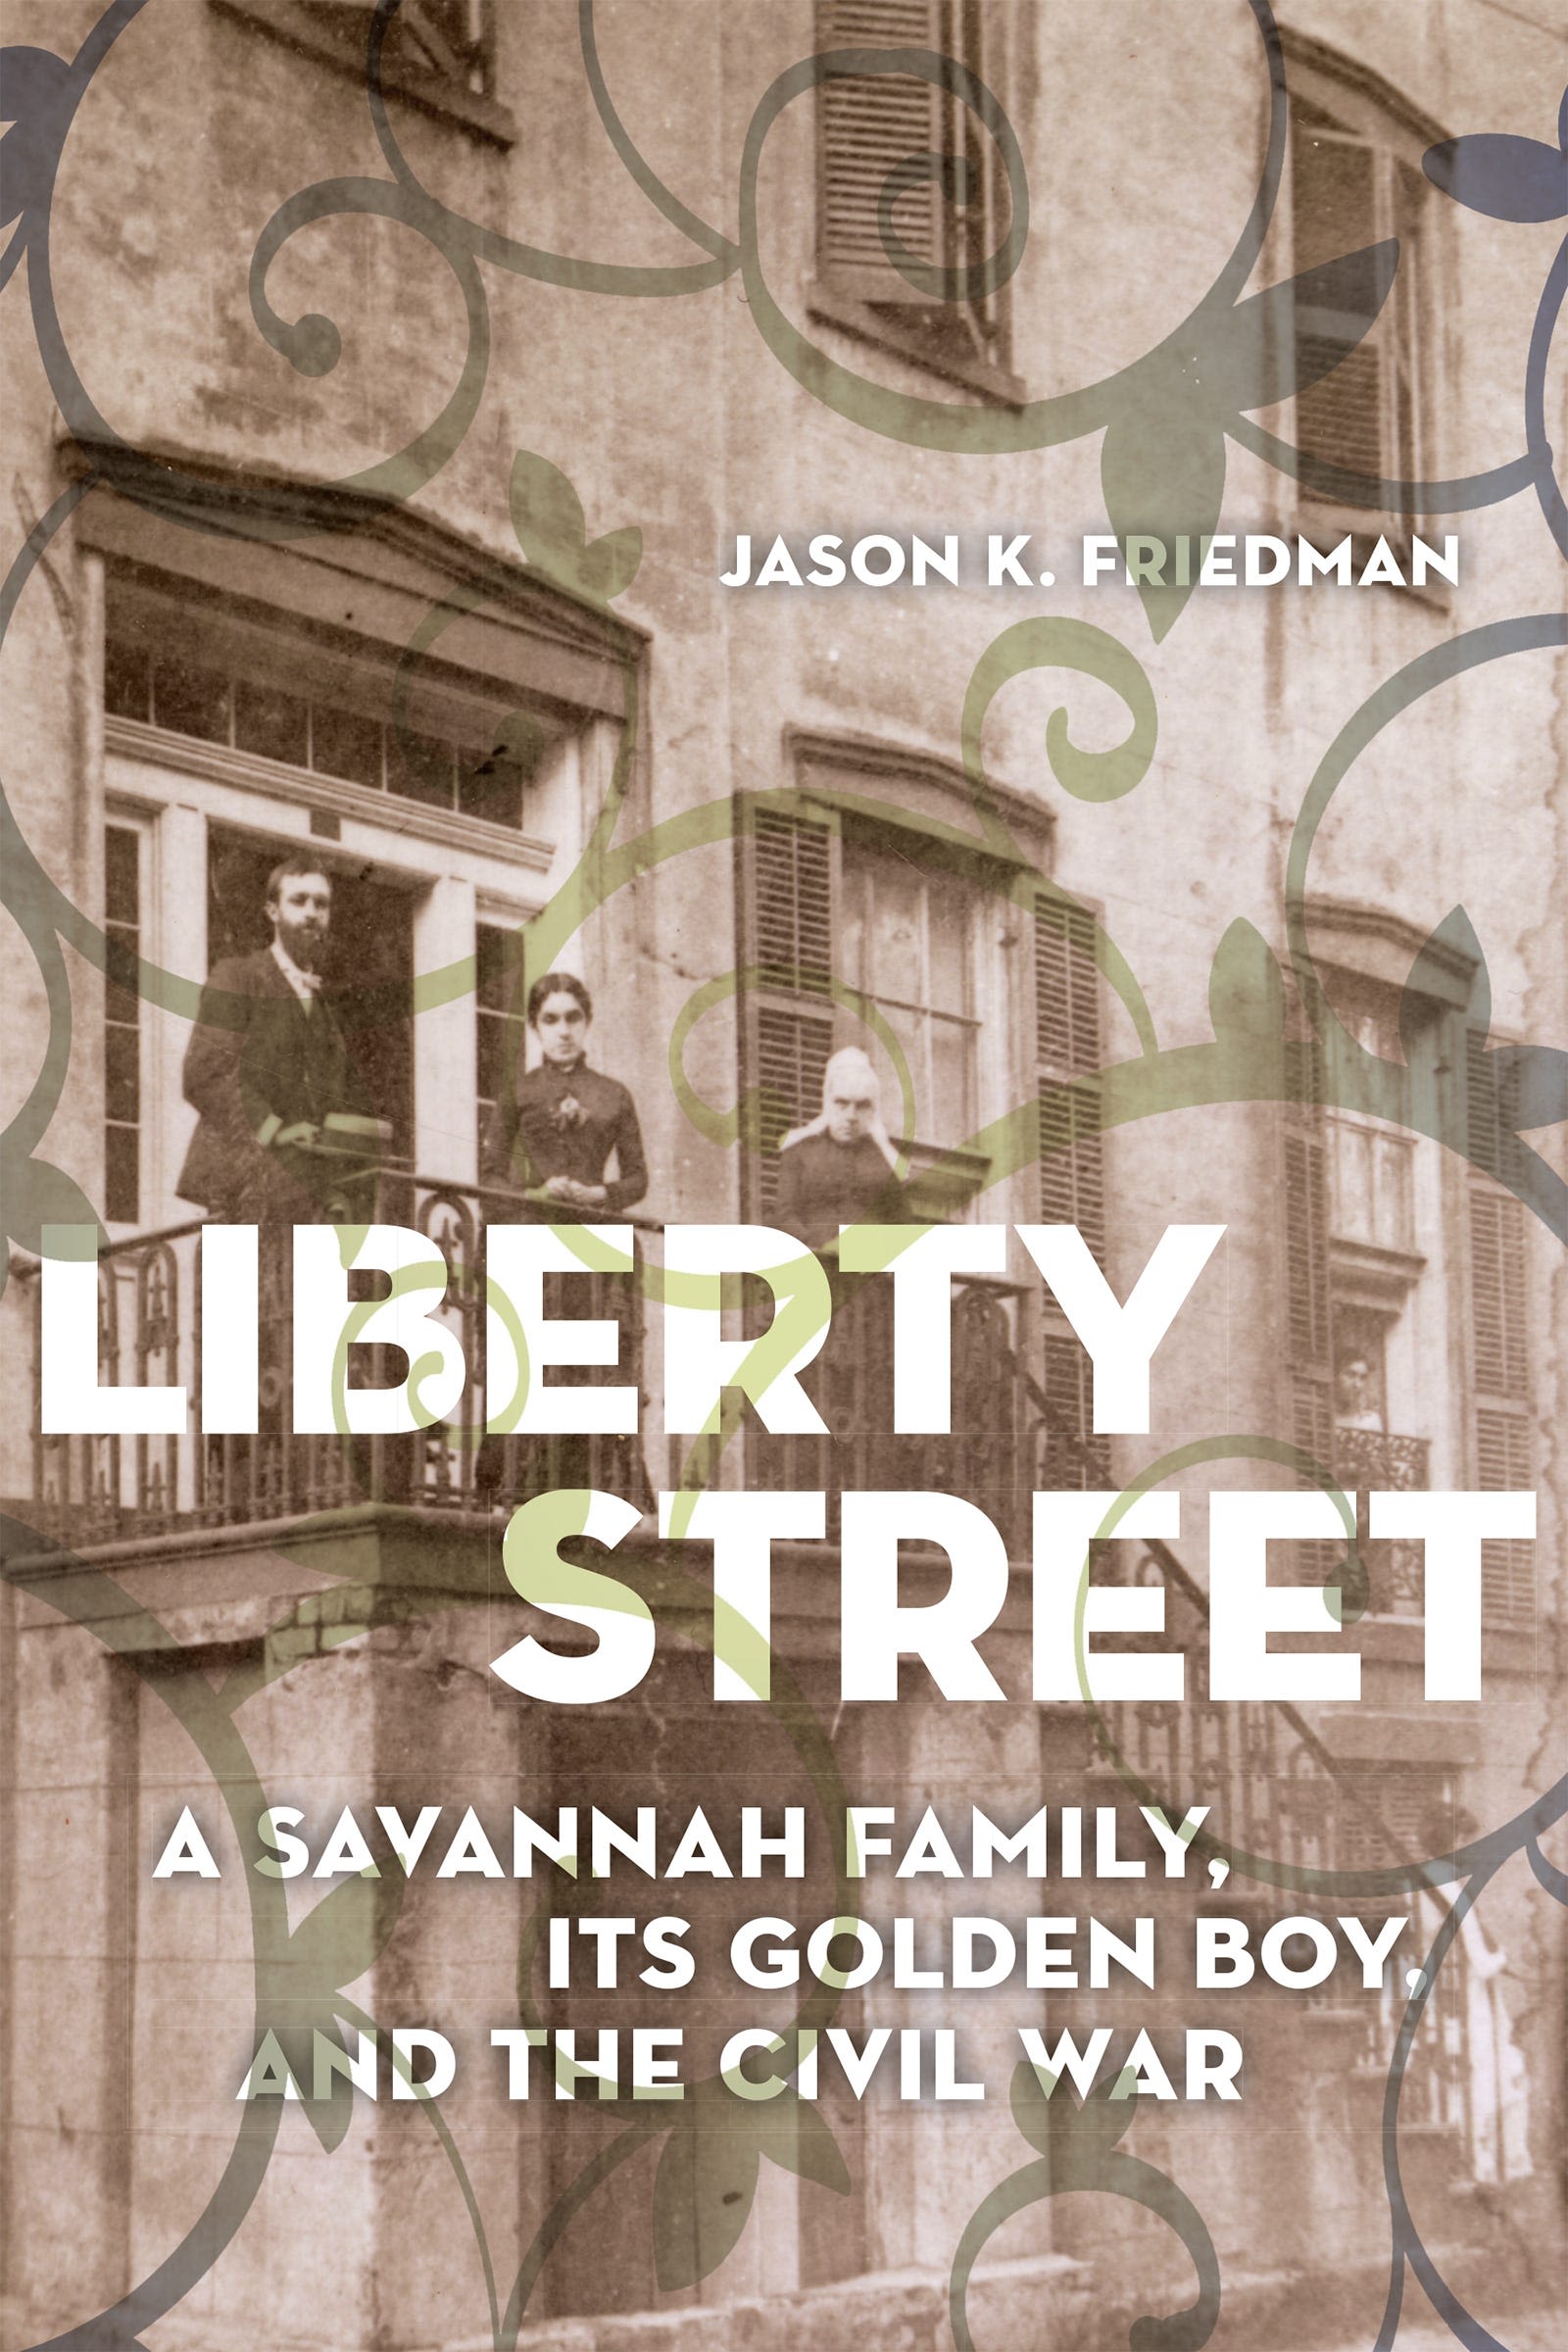 Savannah native returns to discuss his book and research into the Solomon Cohen house